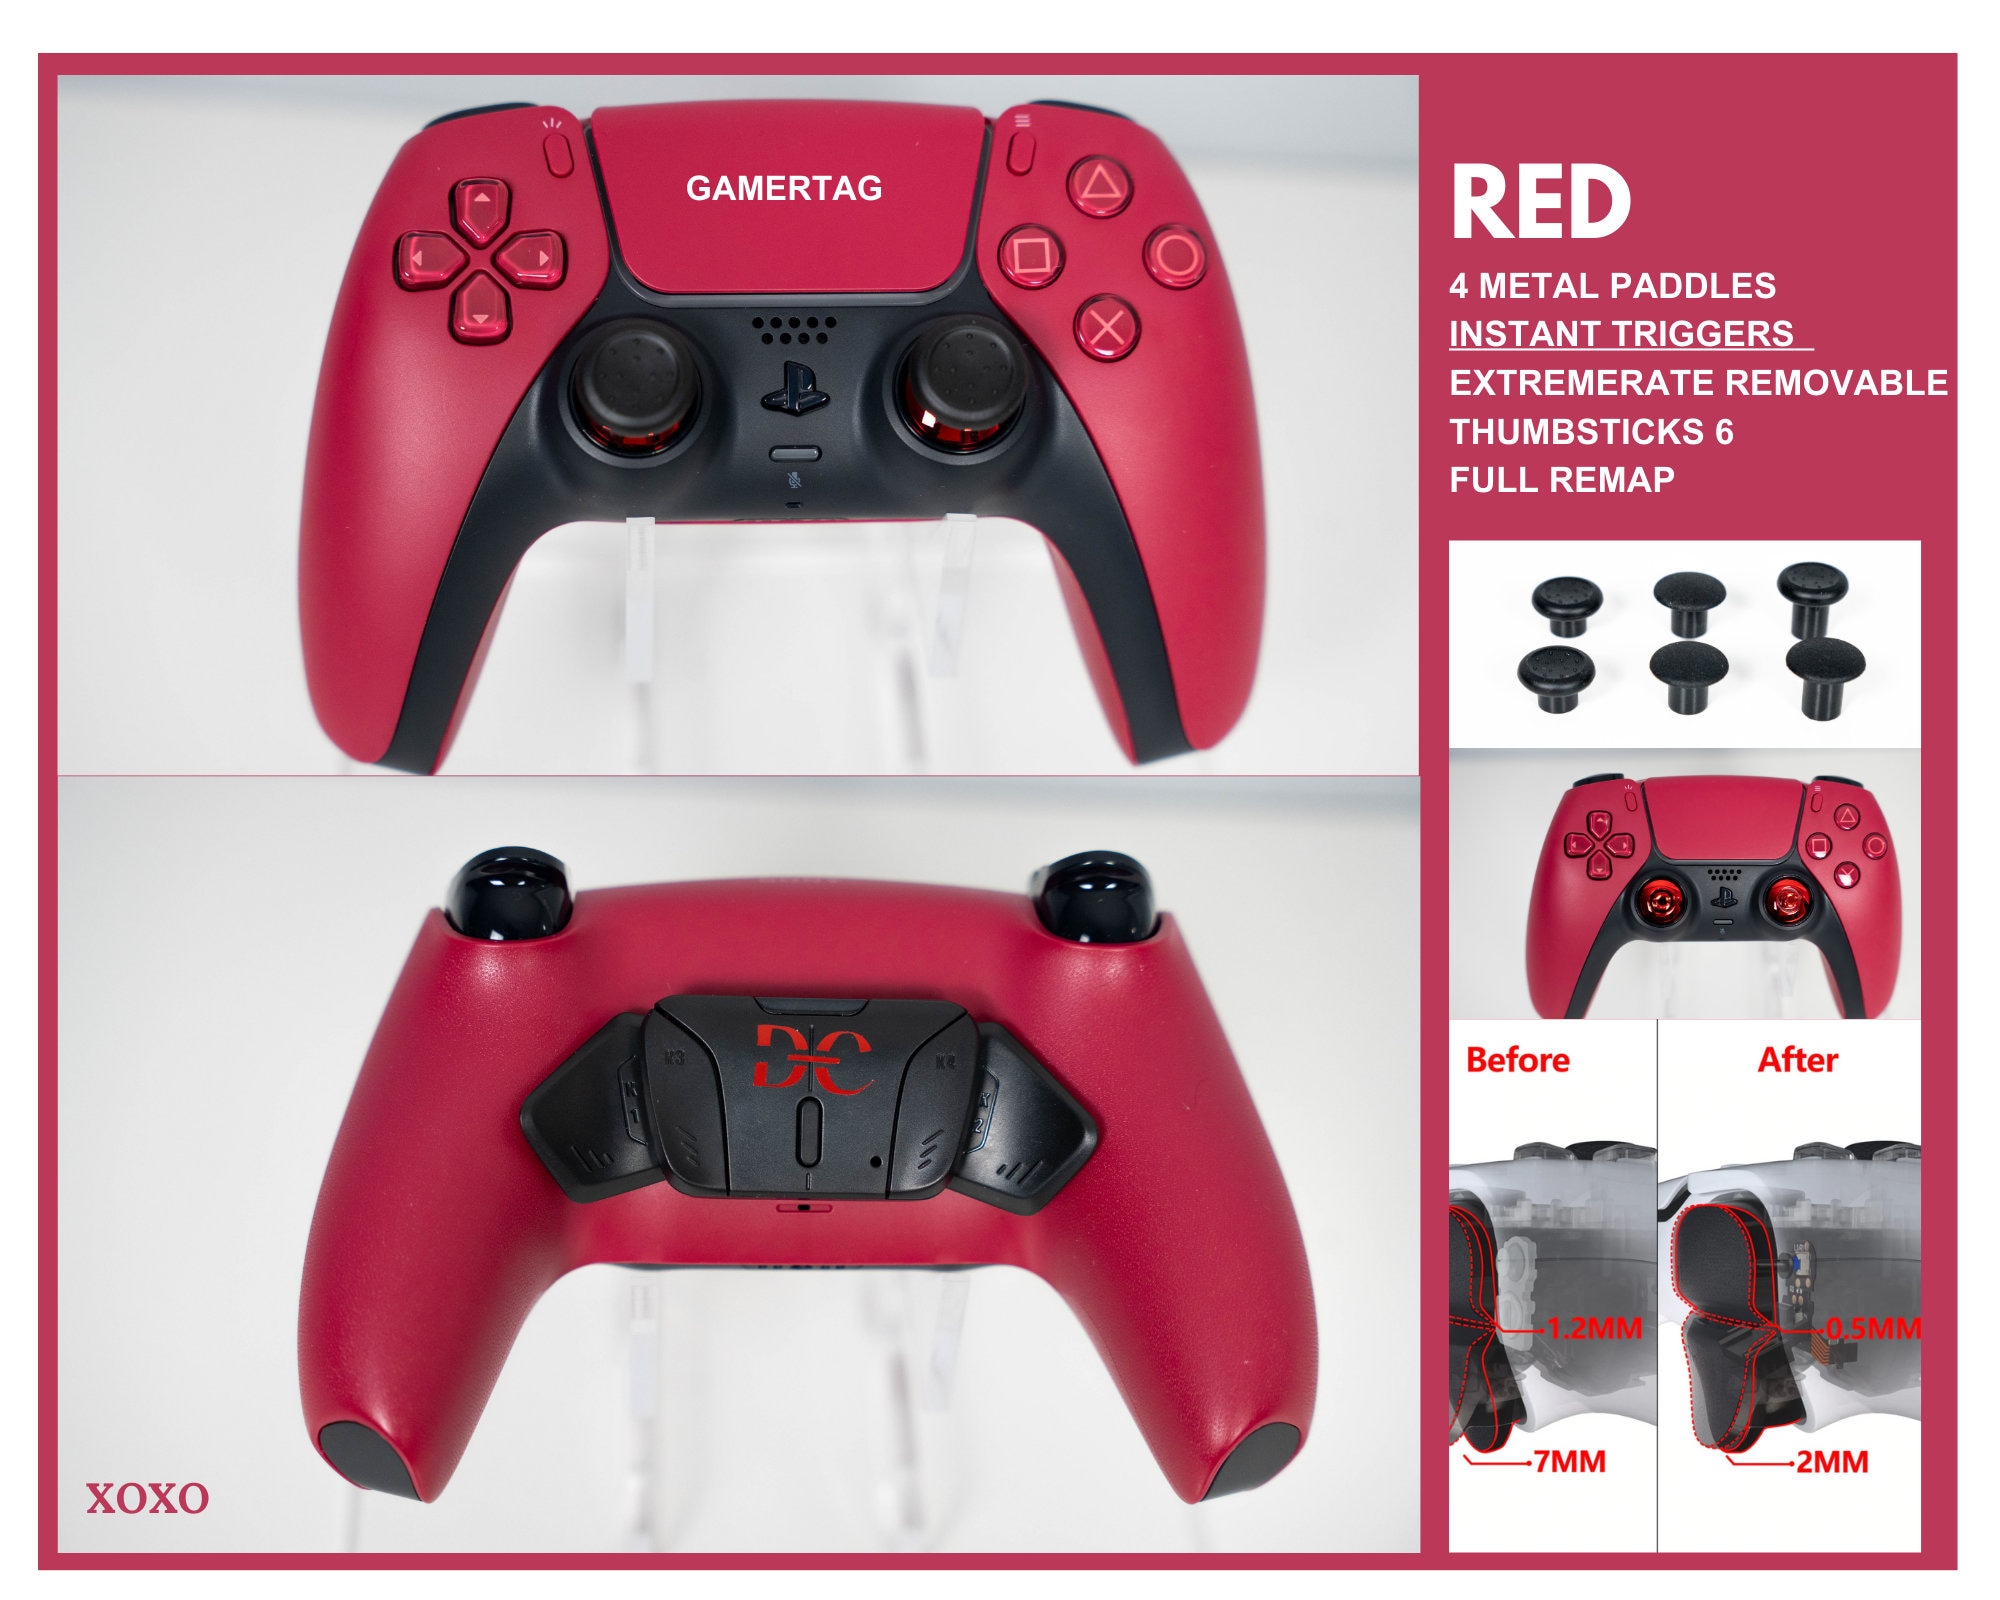 RED RISE 4 Orignals PS5 Controller Cosmic Red With 4 Back Pedals and  Instant Triggers extremerate Rise4 